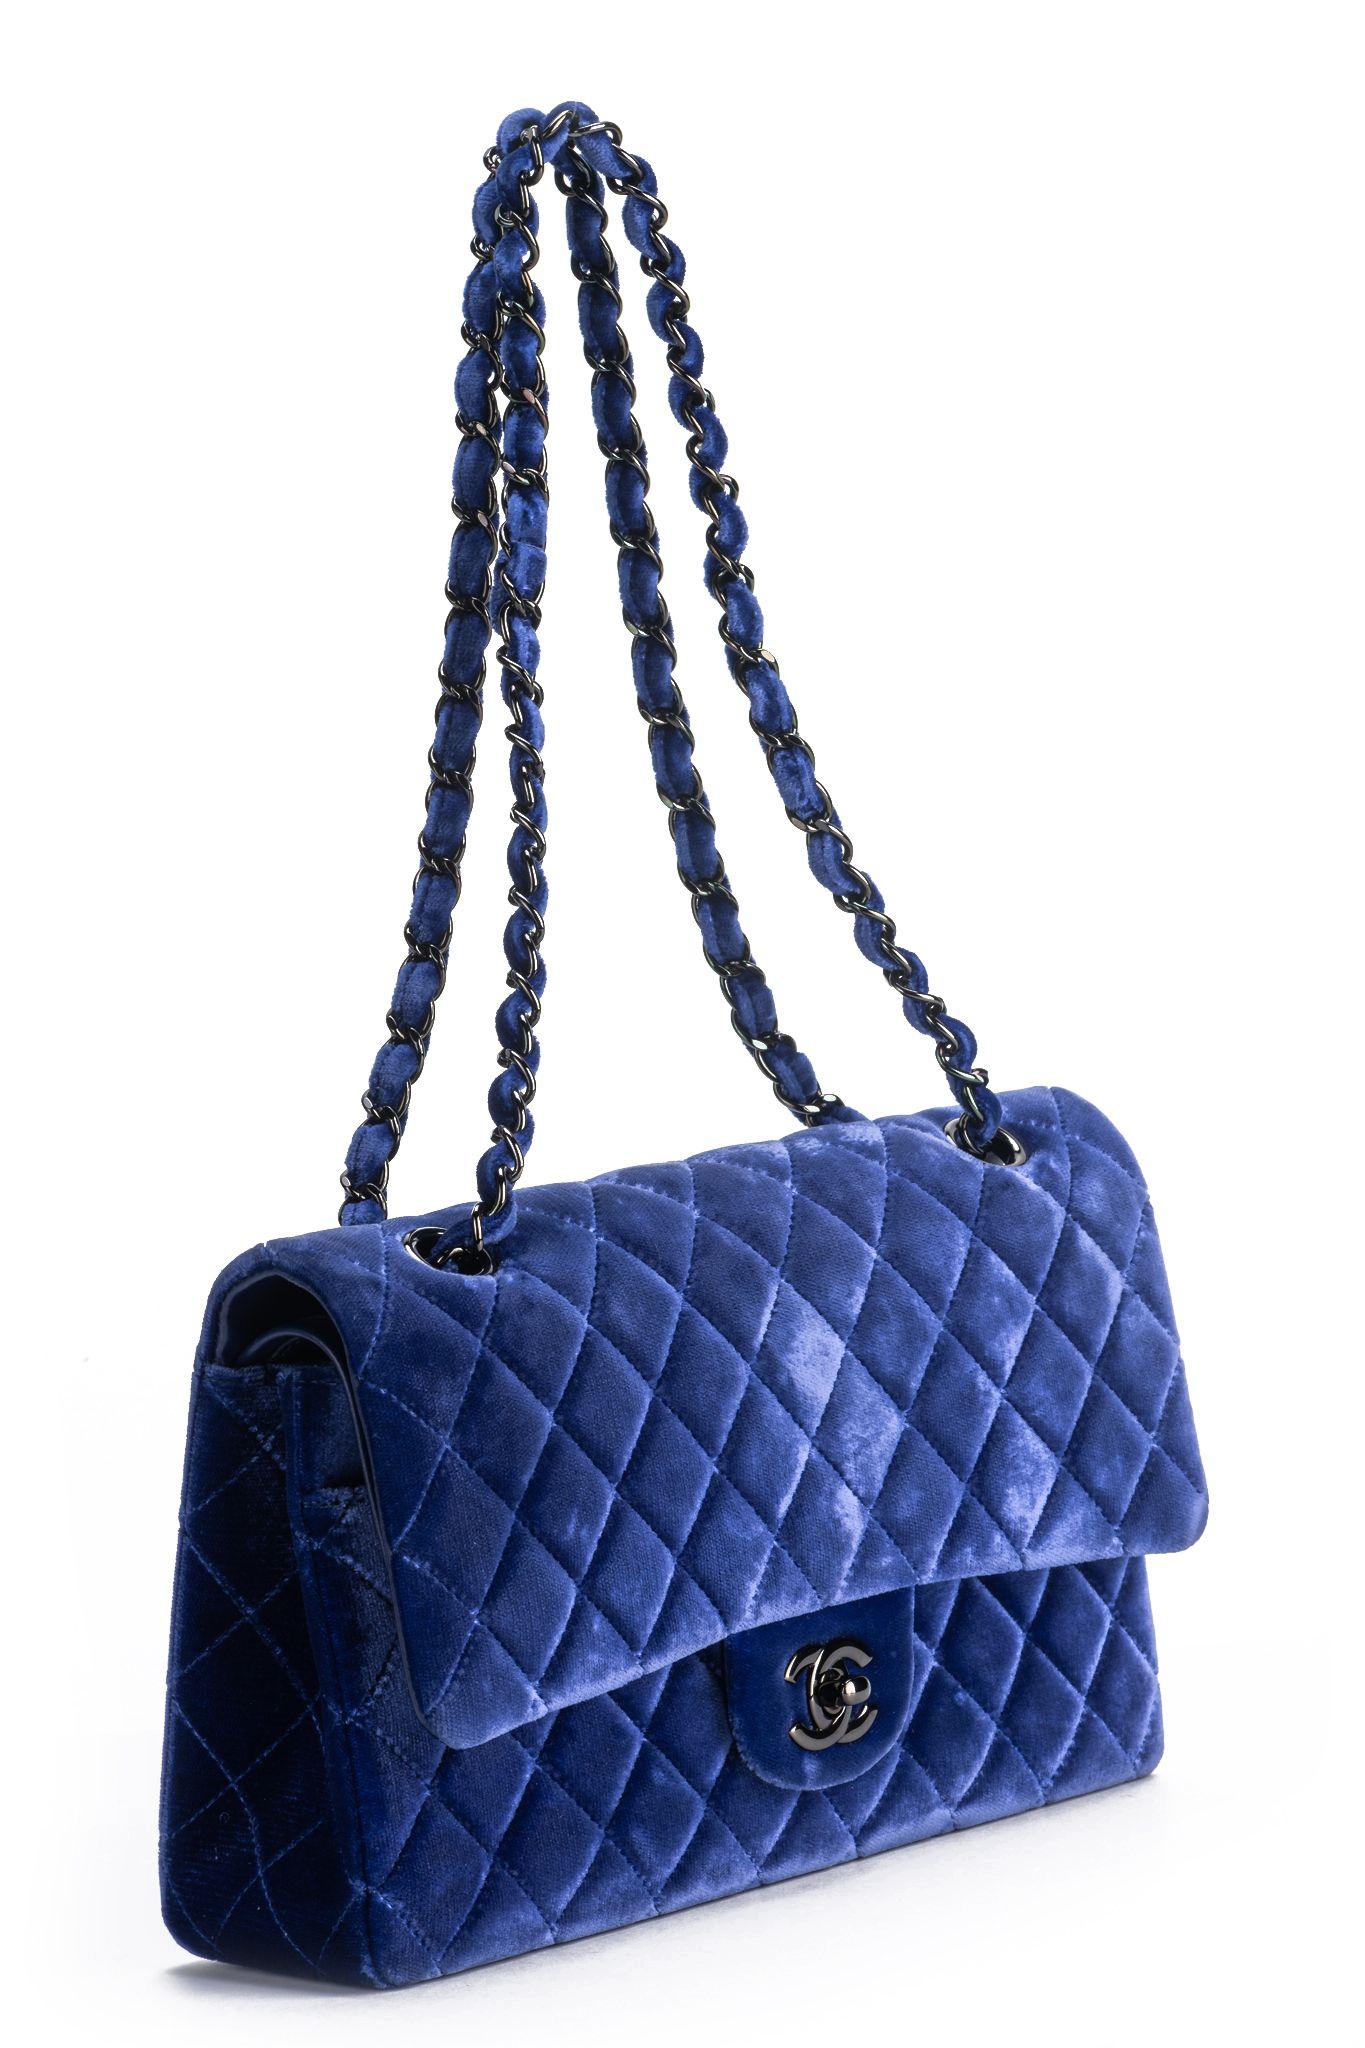 Chanel excellent condition blue velvet double flap, blue leather lining and black hardware.  Shoulder drop 9”/19”. 
Comes with hologram, ID card and original dust cover.
Collection 20. Current store price $10,200.